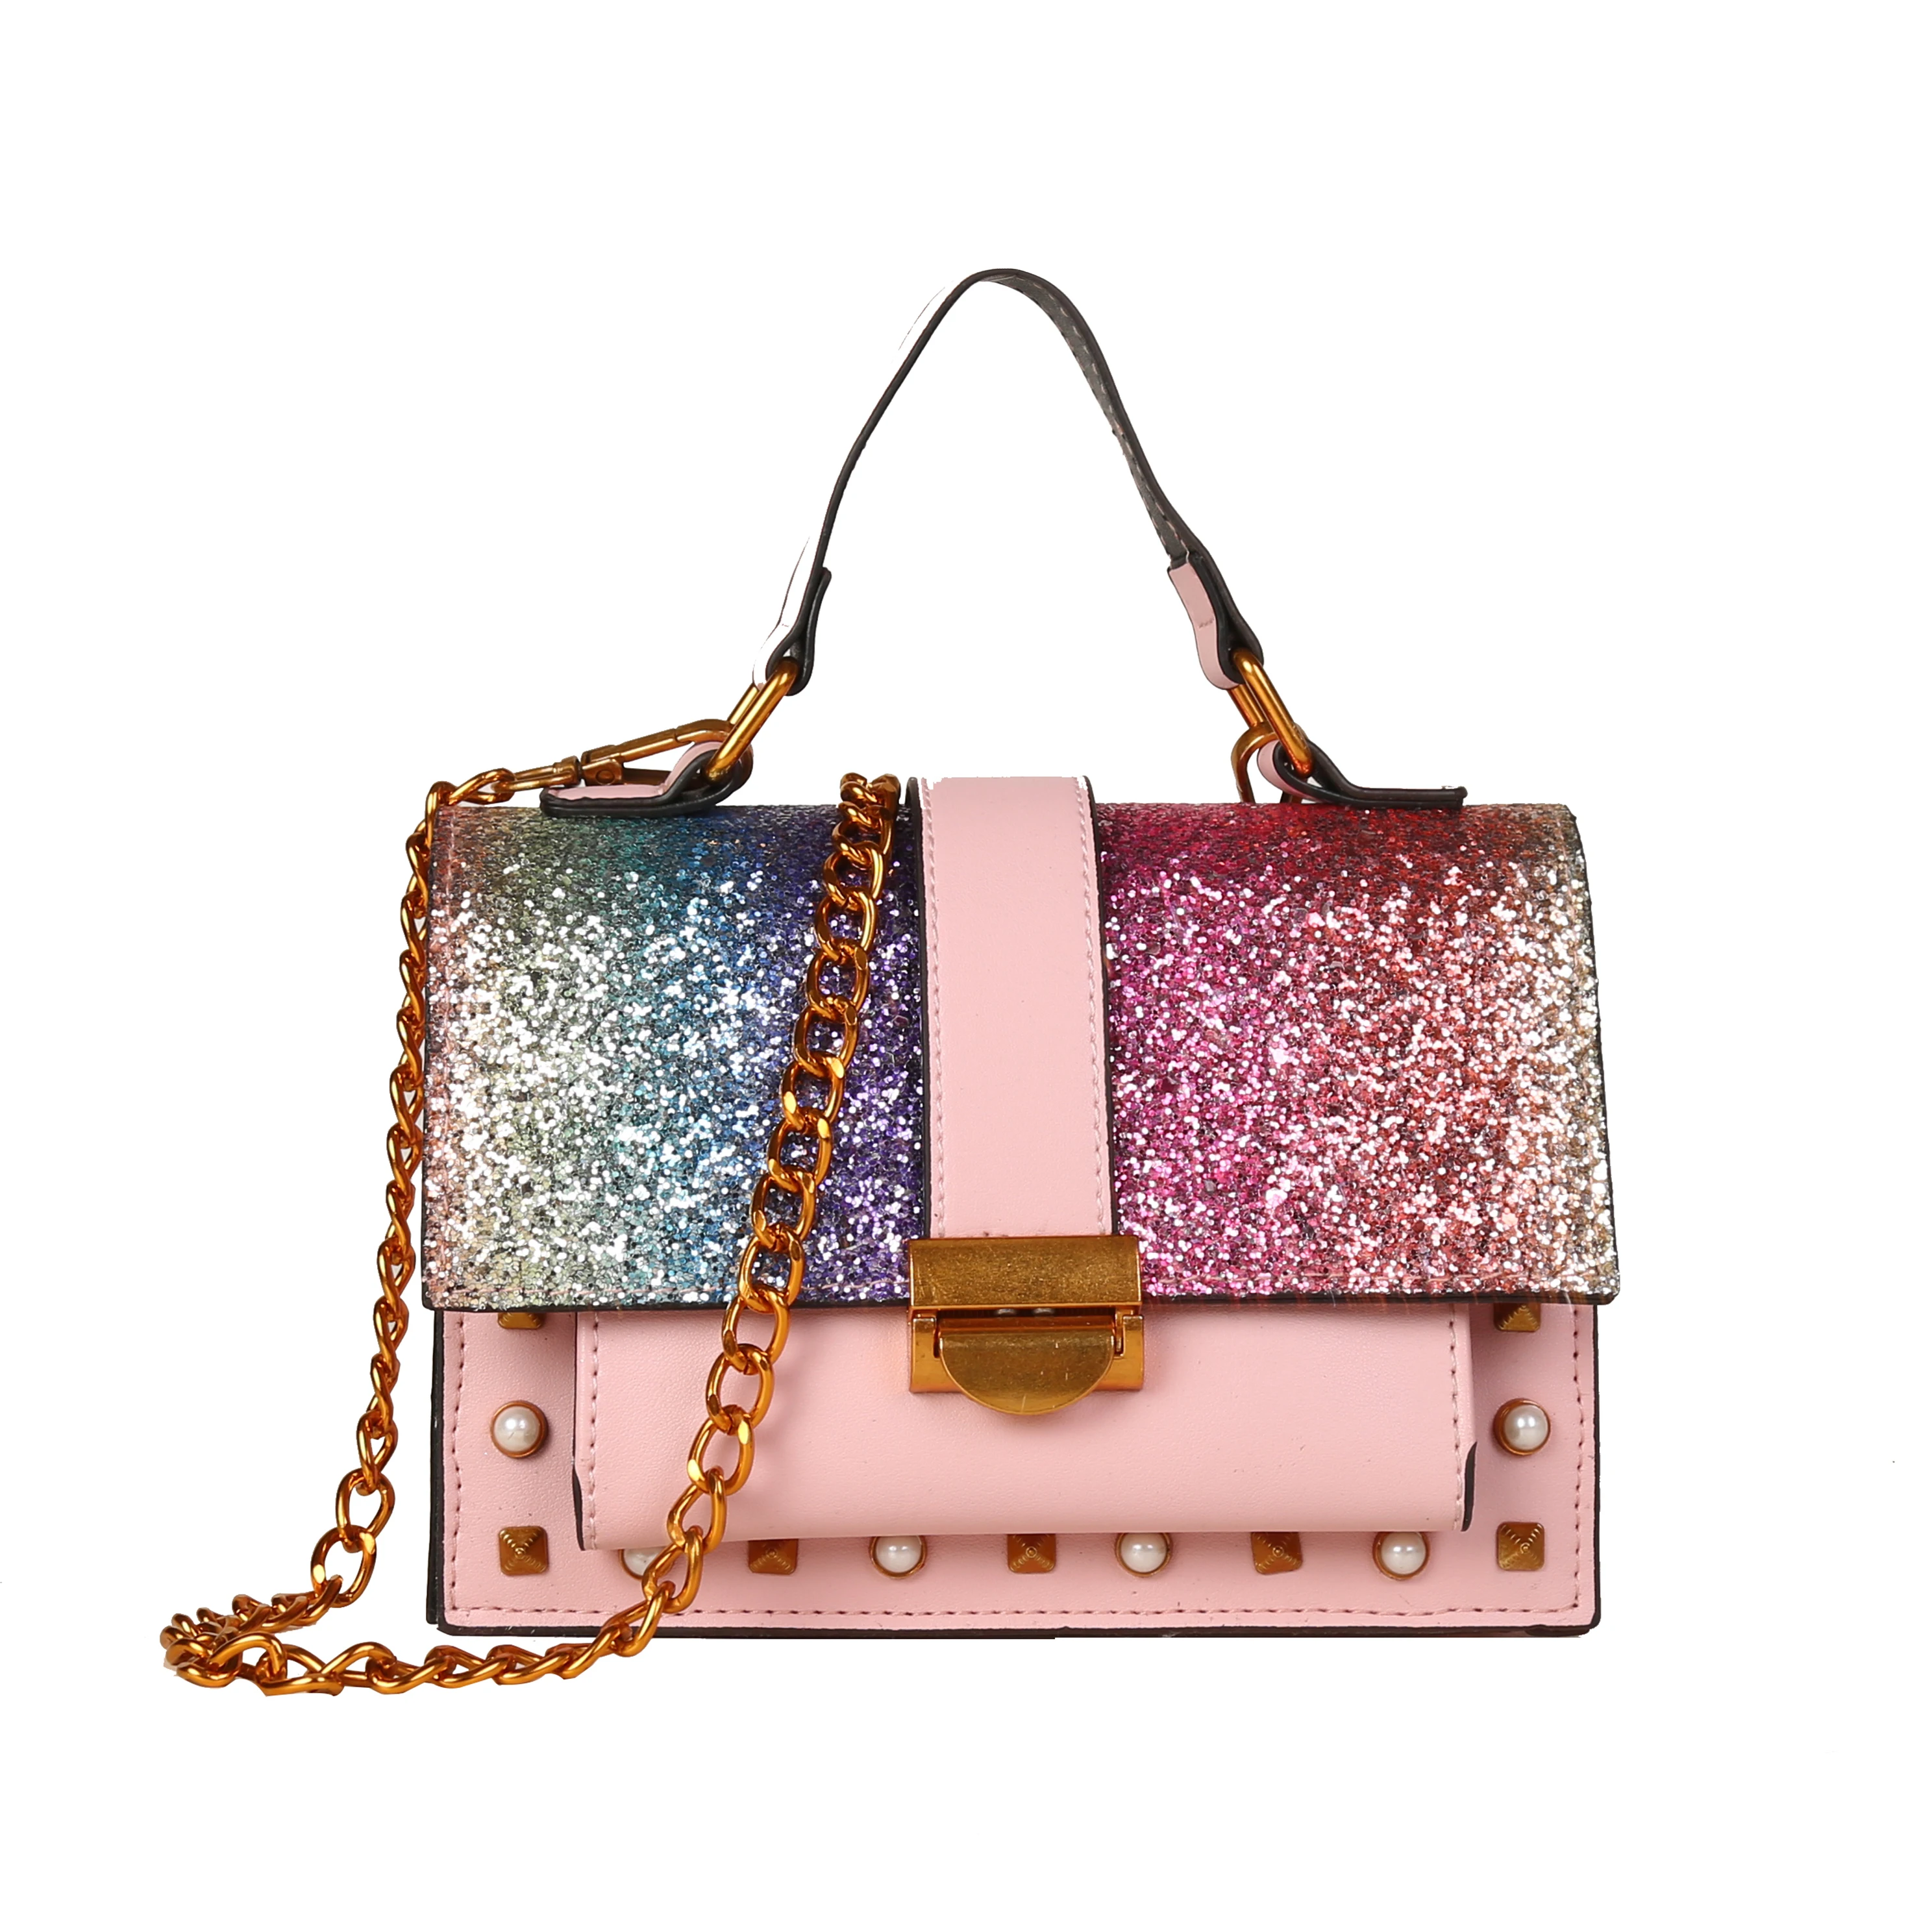 

Women's new fashion sequined shoulder bag wild messenger bag PU leather rainbow sequin chain crossbody bag, As show